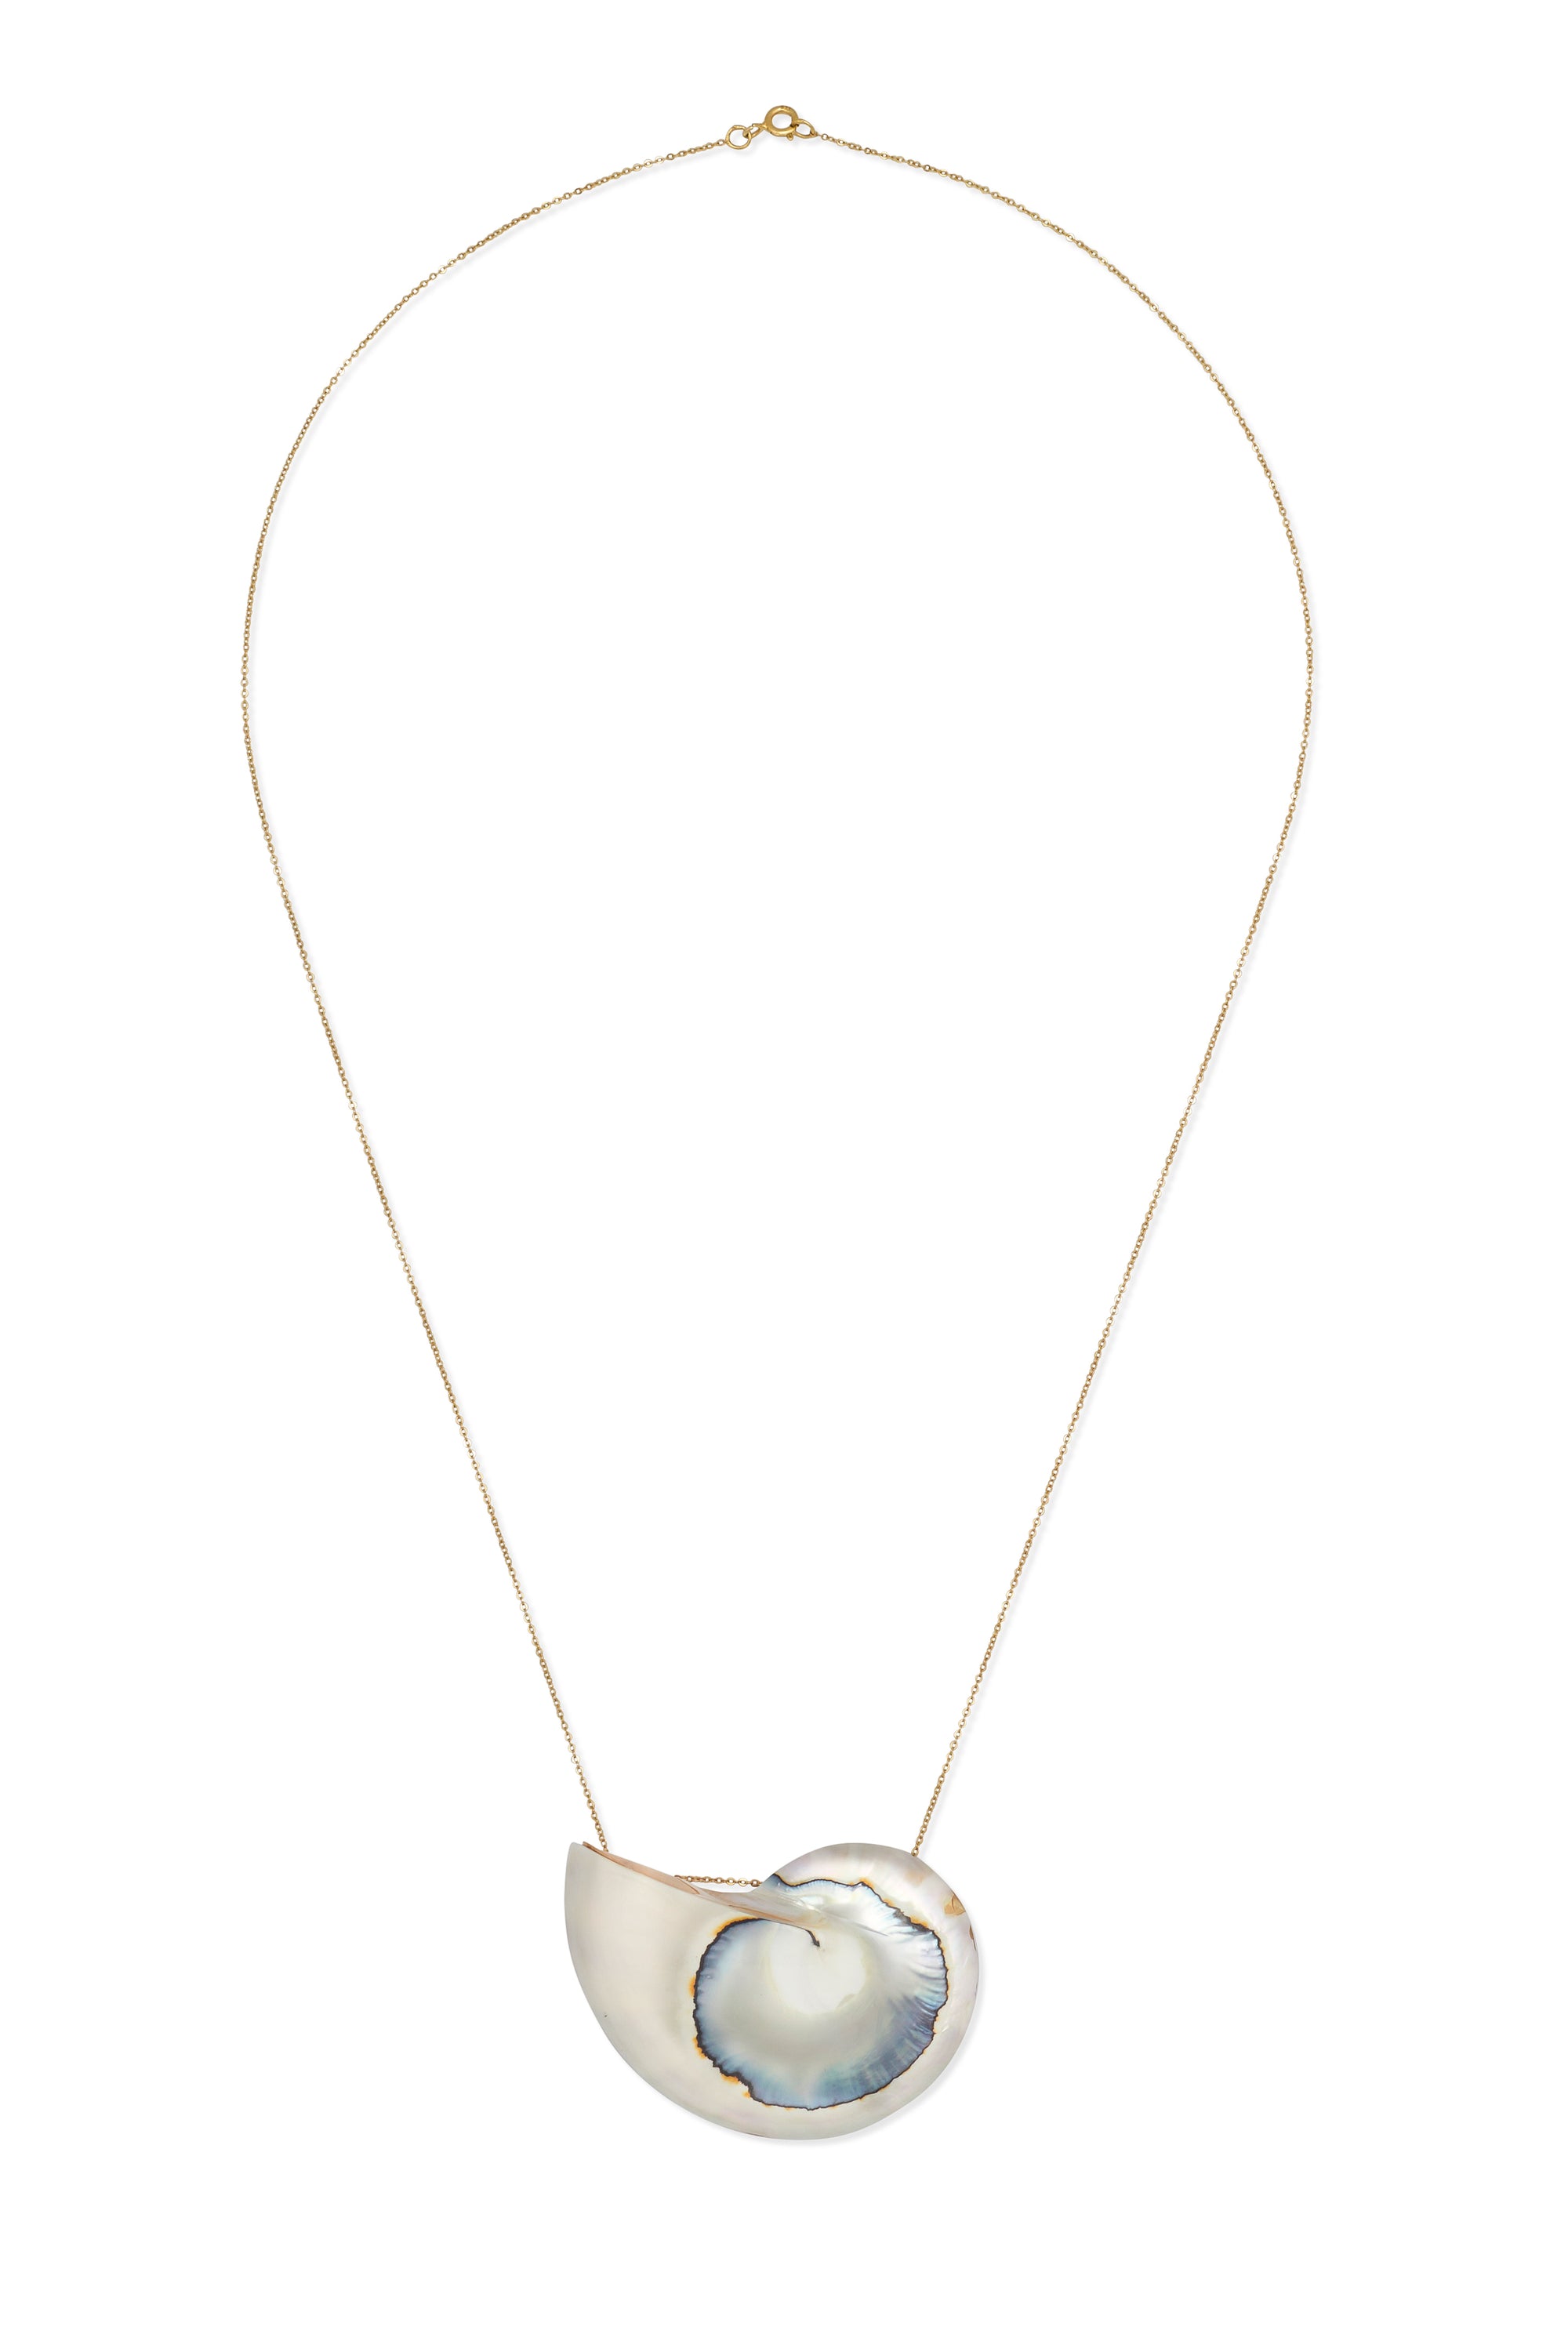 flook the label olamii jewelry collab jumana necklace shell product image